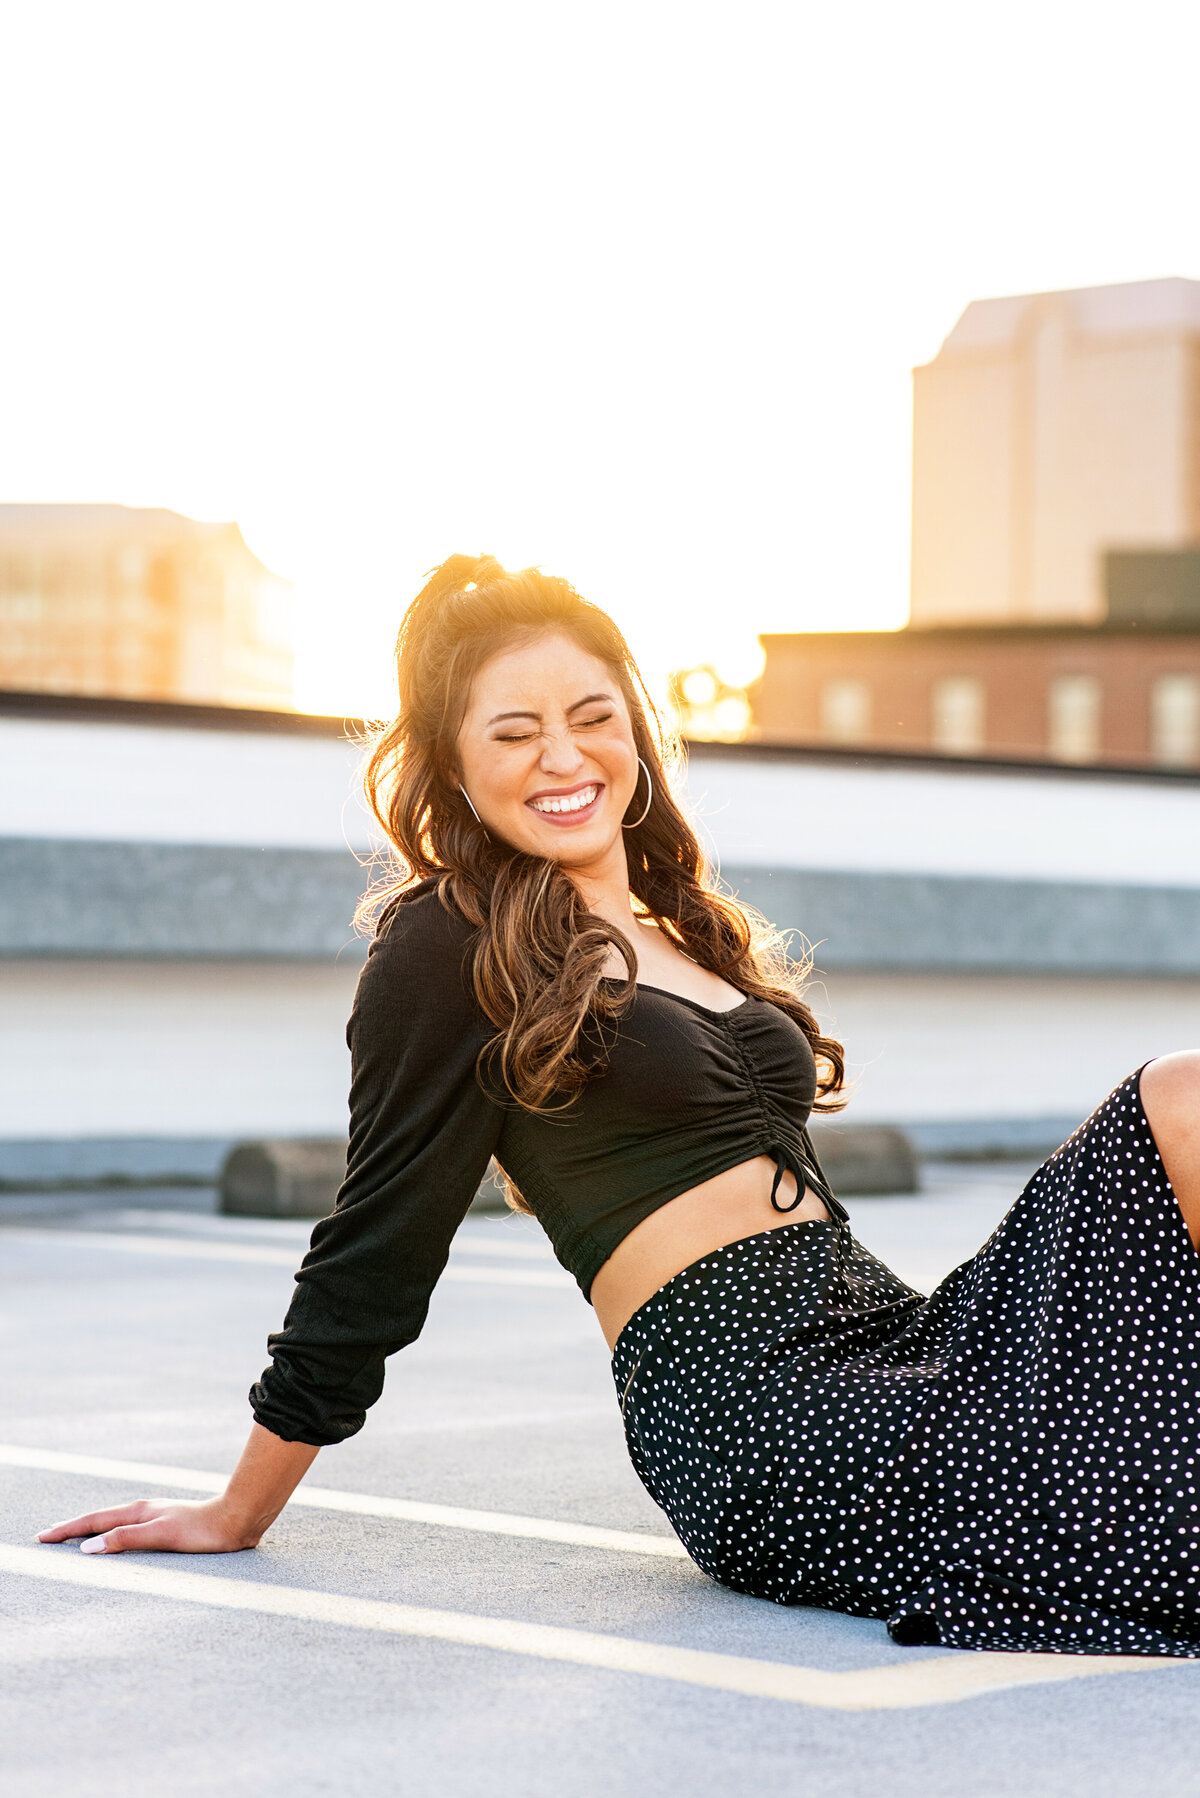 Senior girl laughing on rooftop with eyes closed.